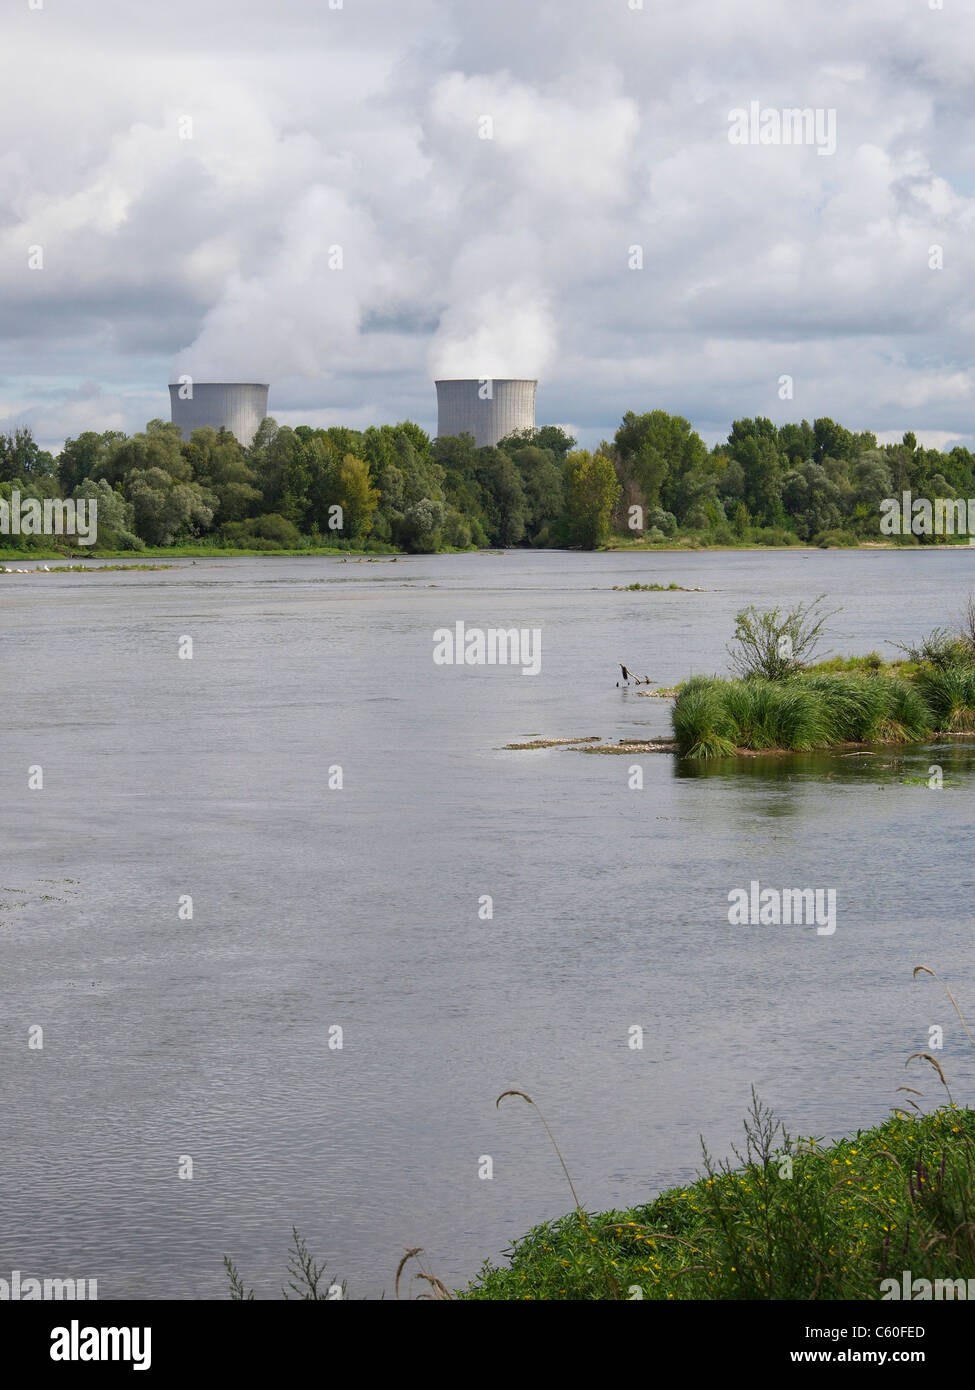 Along the Loire river there are many nuclear power stations. This one is in St. Laurent des Eaux, near Blois. France Stock Photo